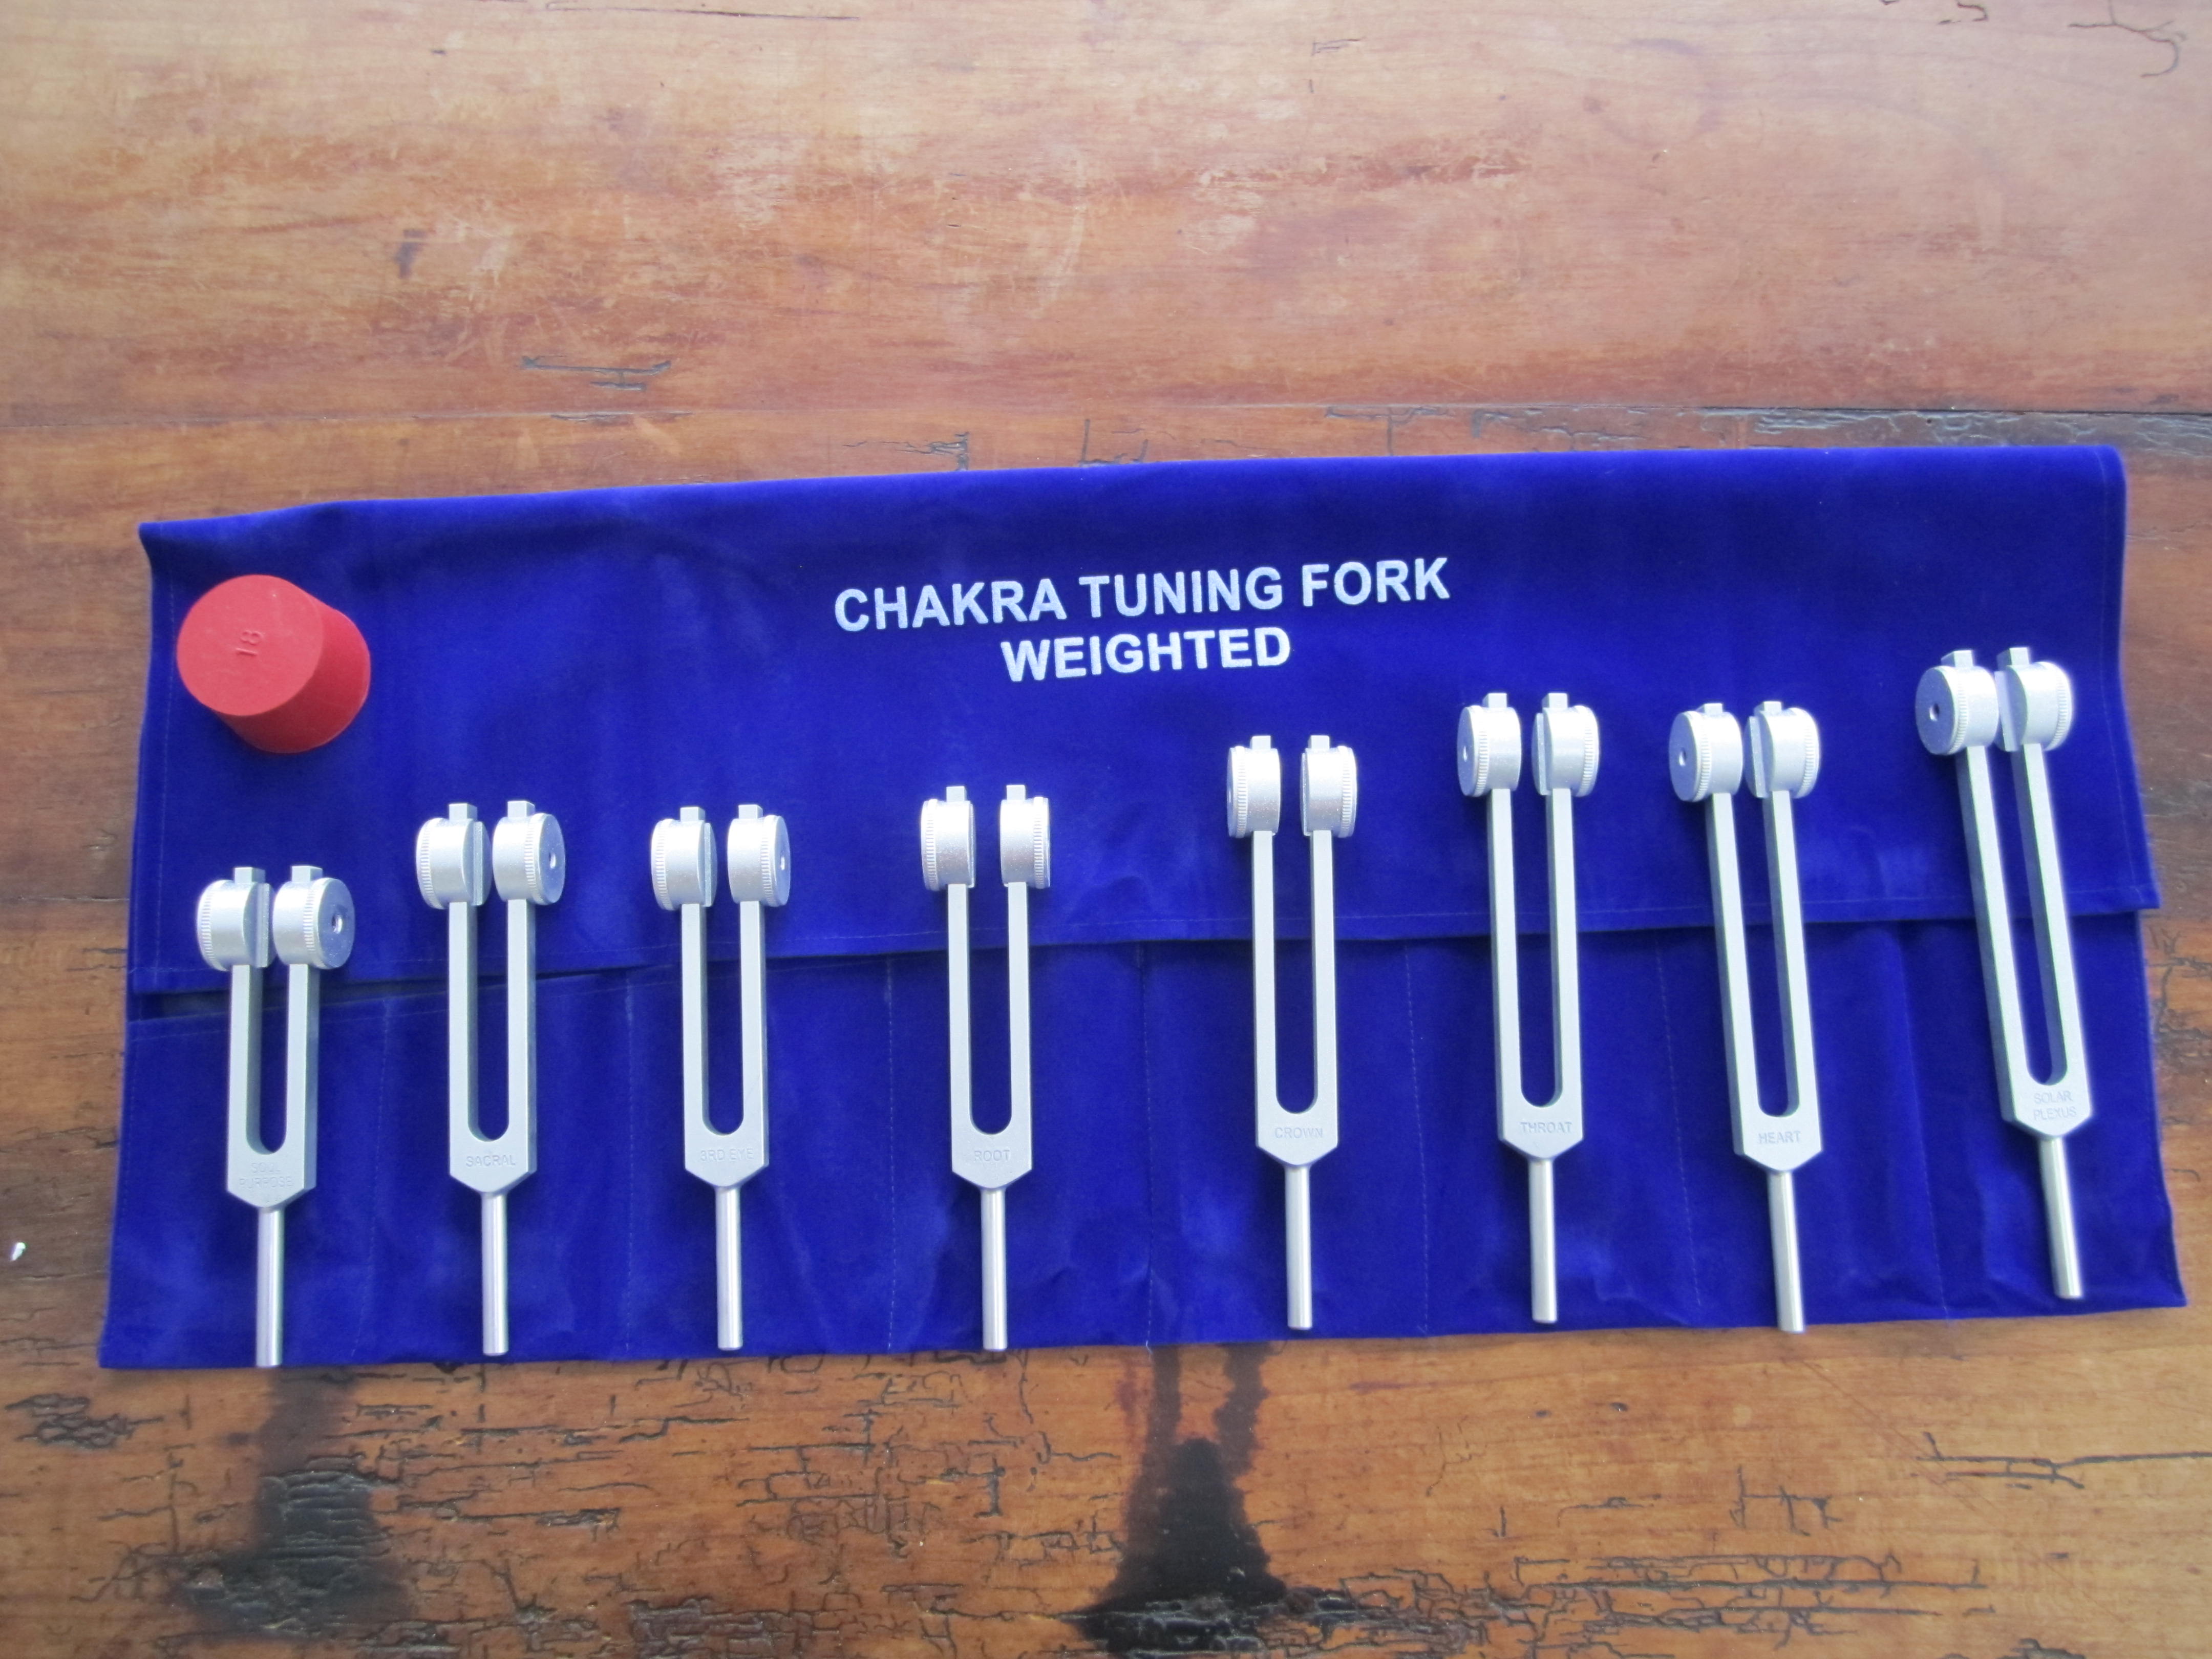 8 Chakra Color Weighted Healing Tuning Forks Includes Soul Purpose USA SELLER 